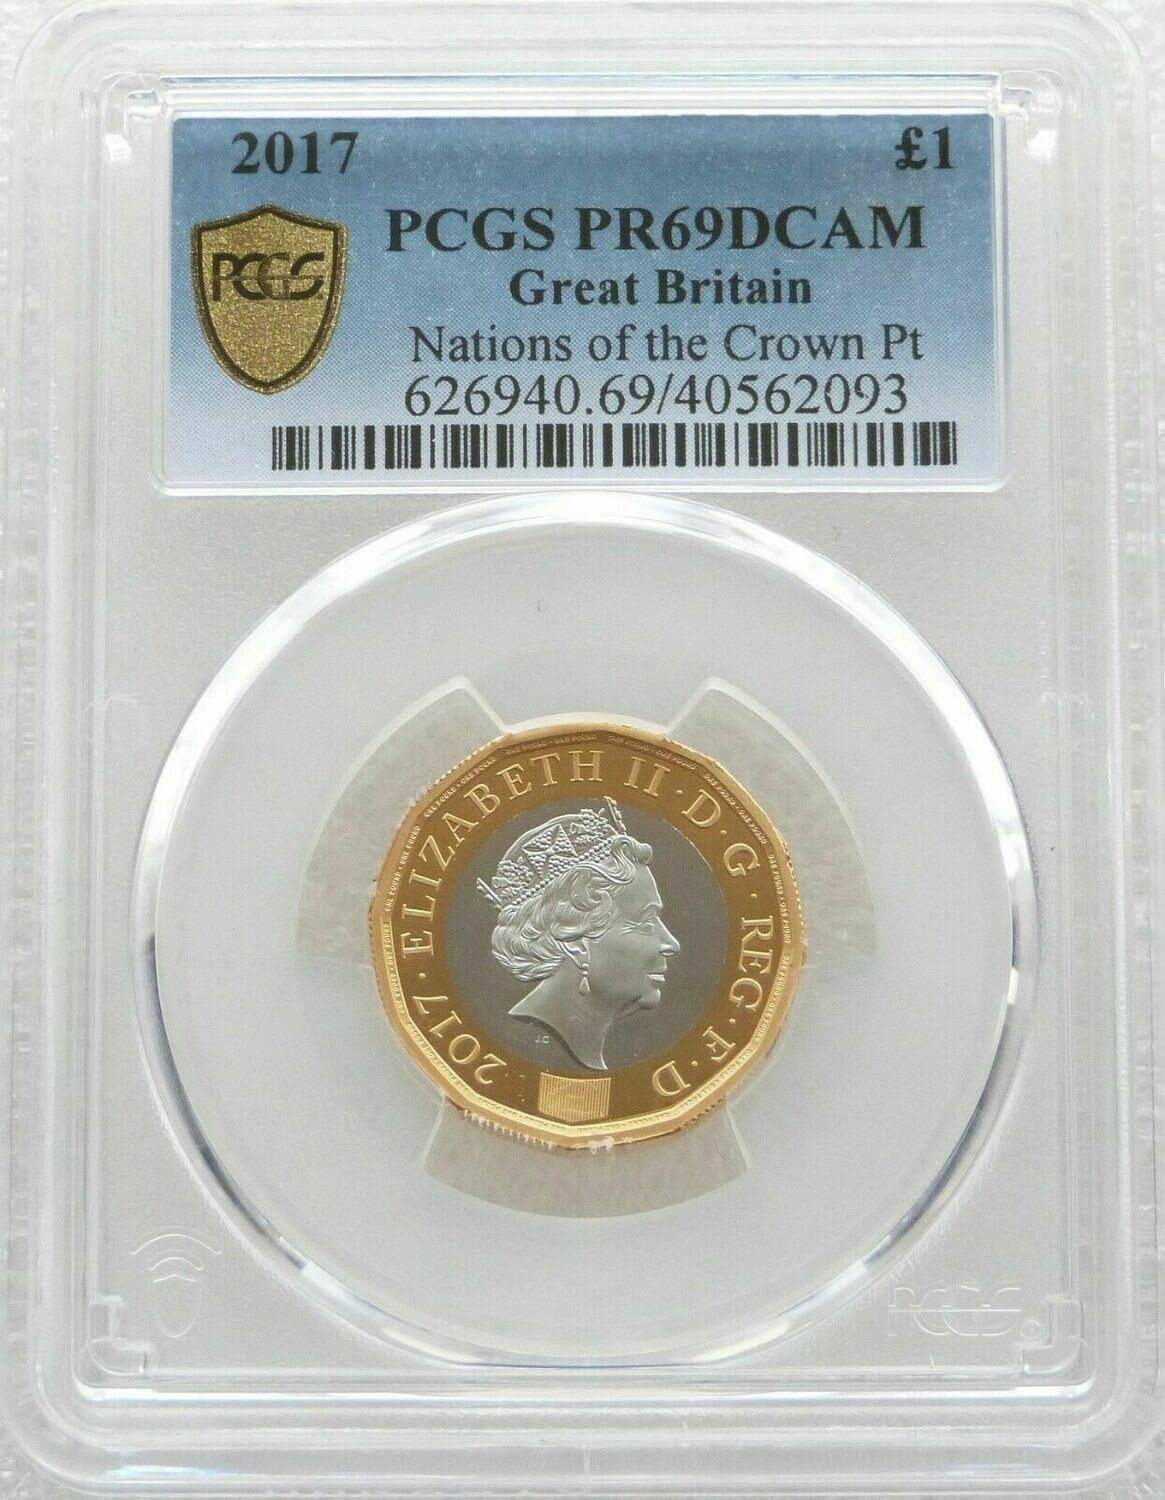 2017 Nations of the Crown £1 Platinum Proof Coin PCGS PR69 DCAM - Mintage 232